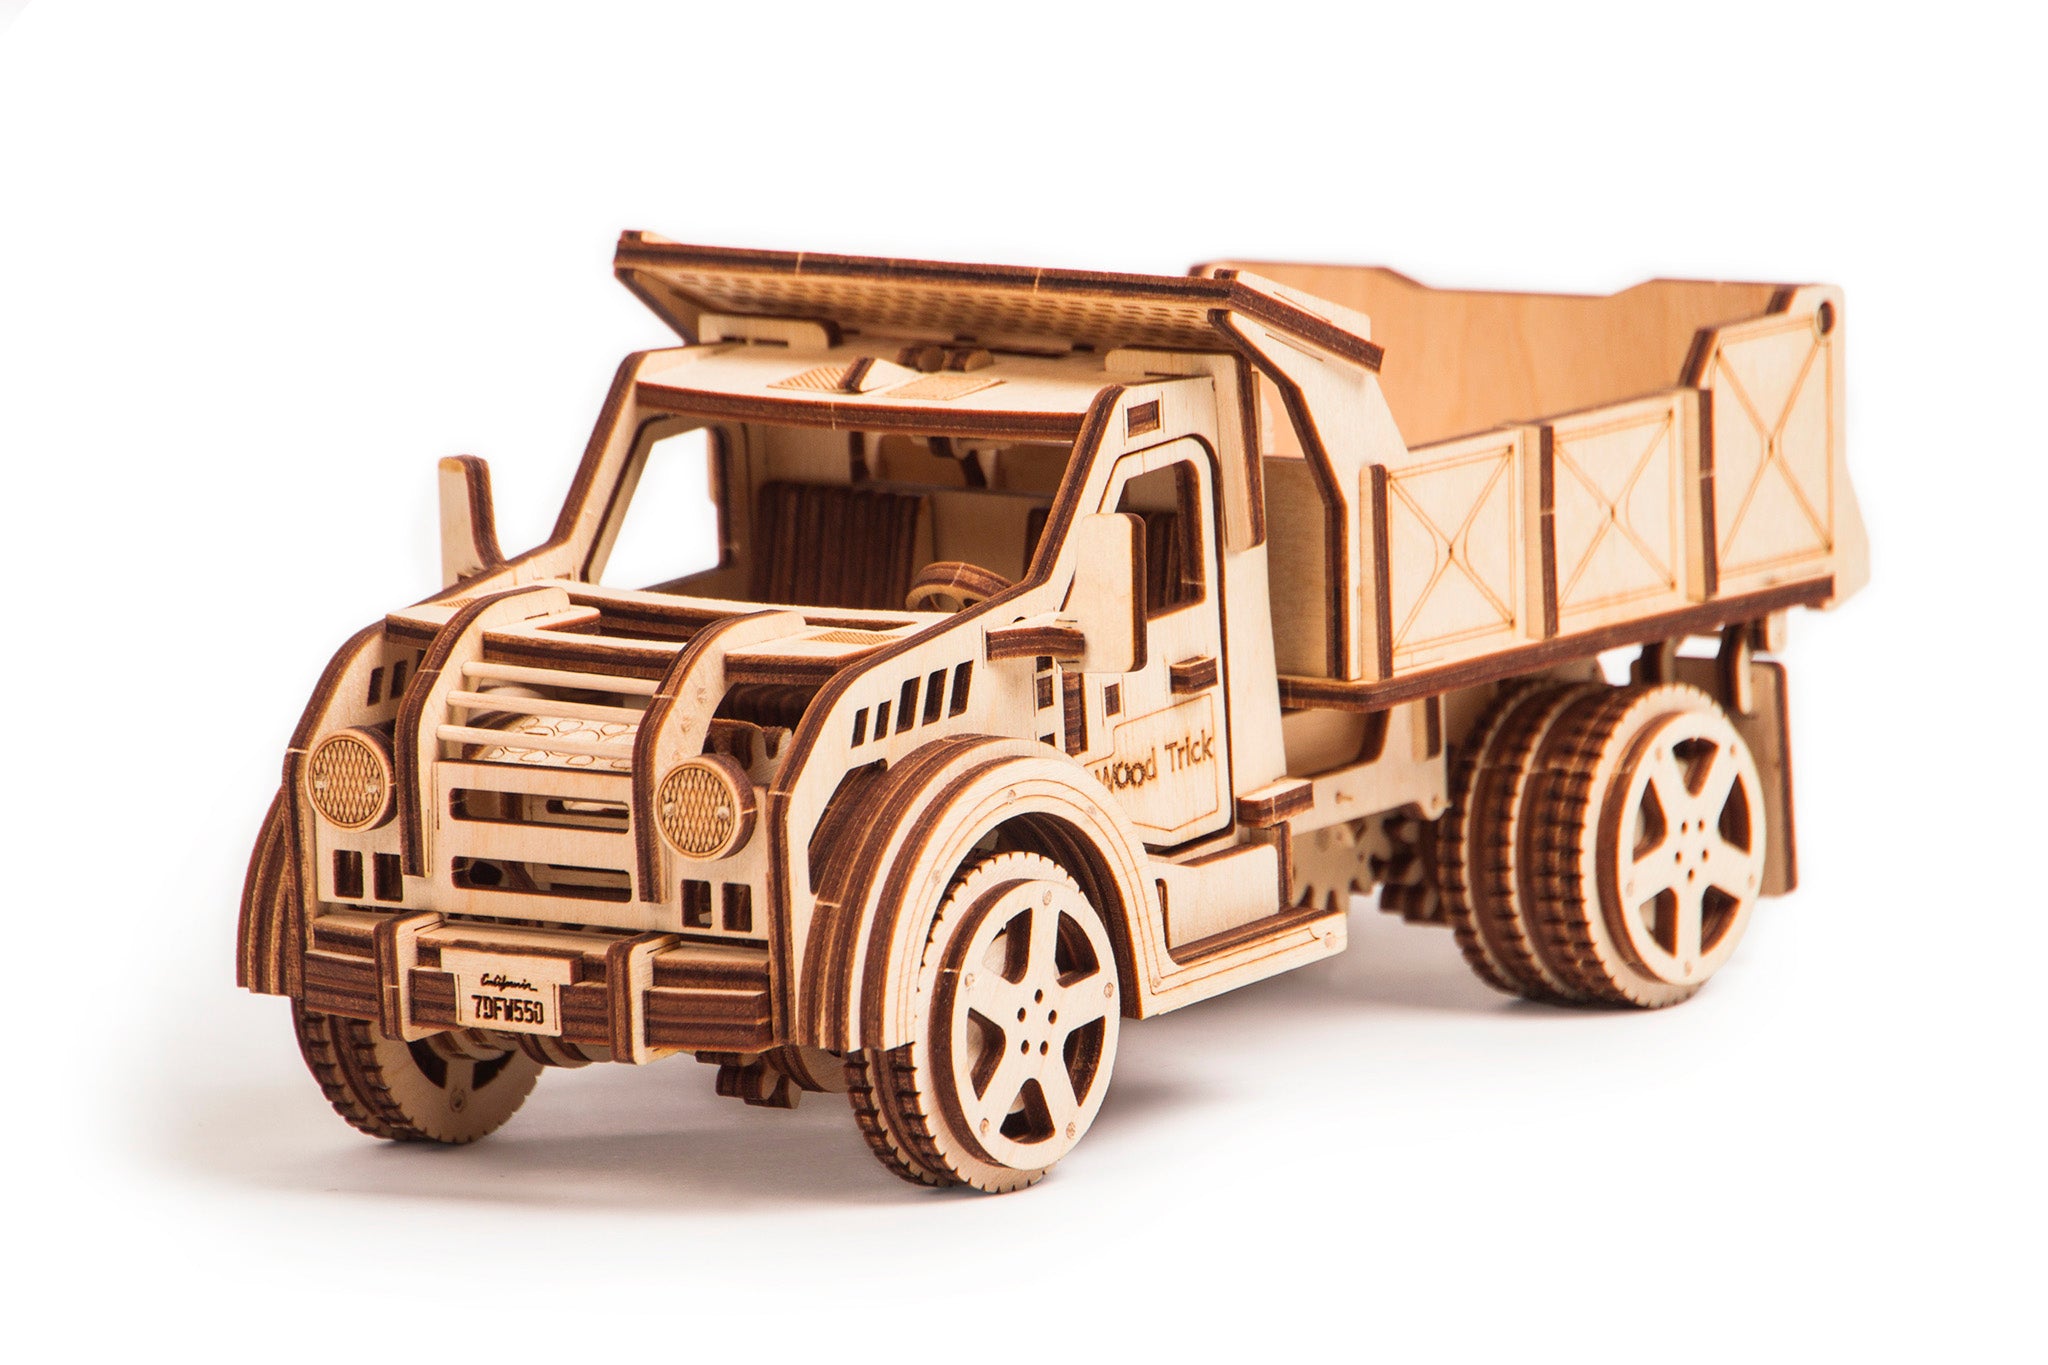 A superb addition to any collection of 3d wooden mechanical toys.